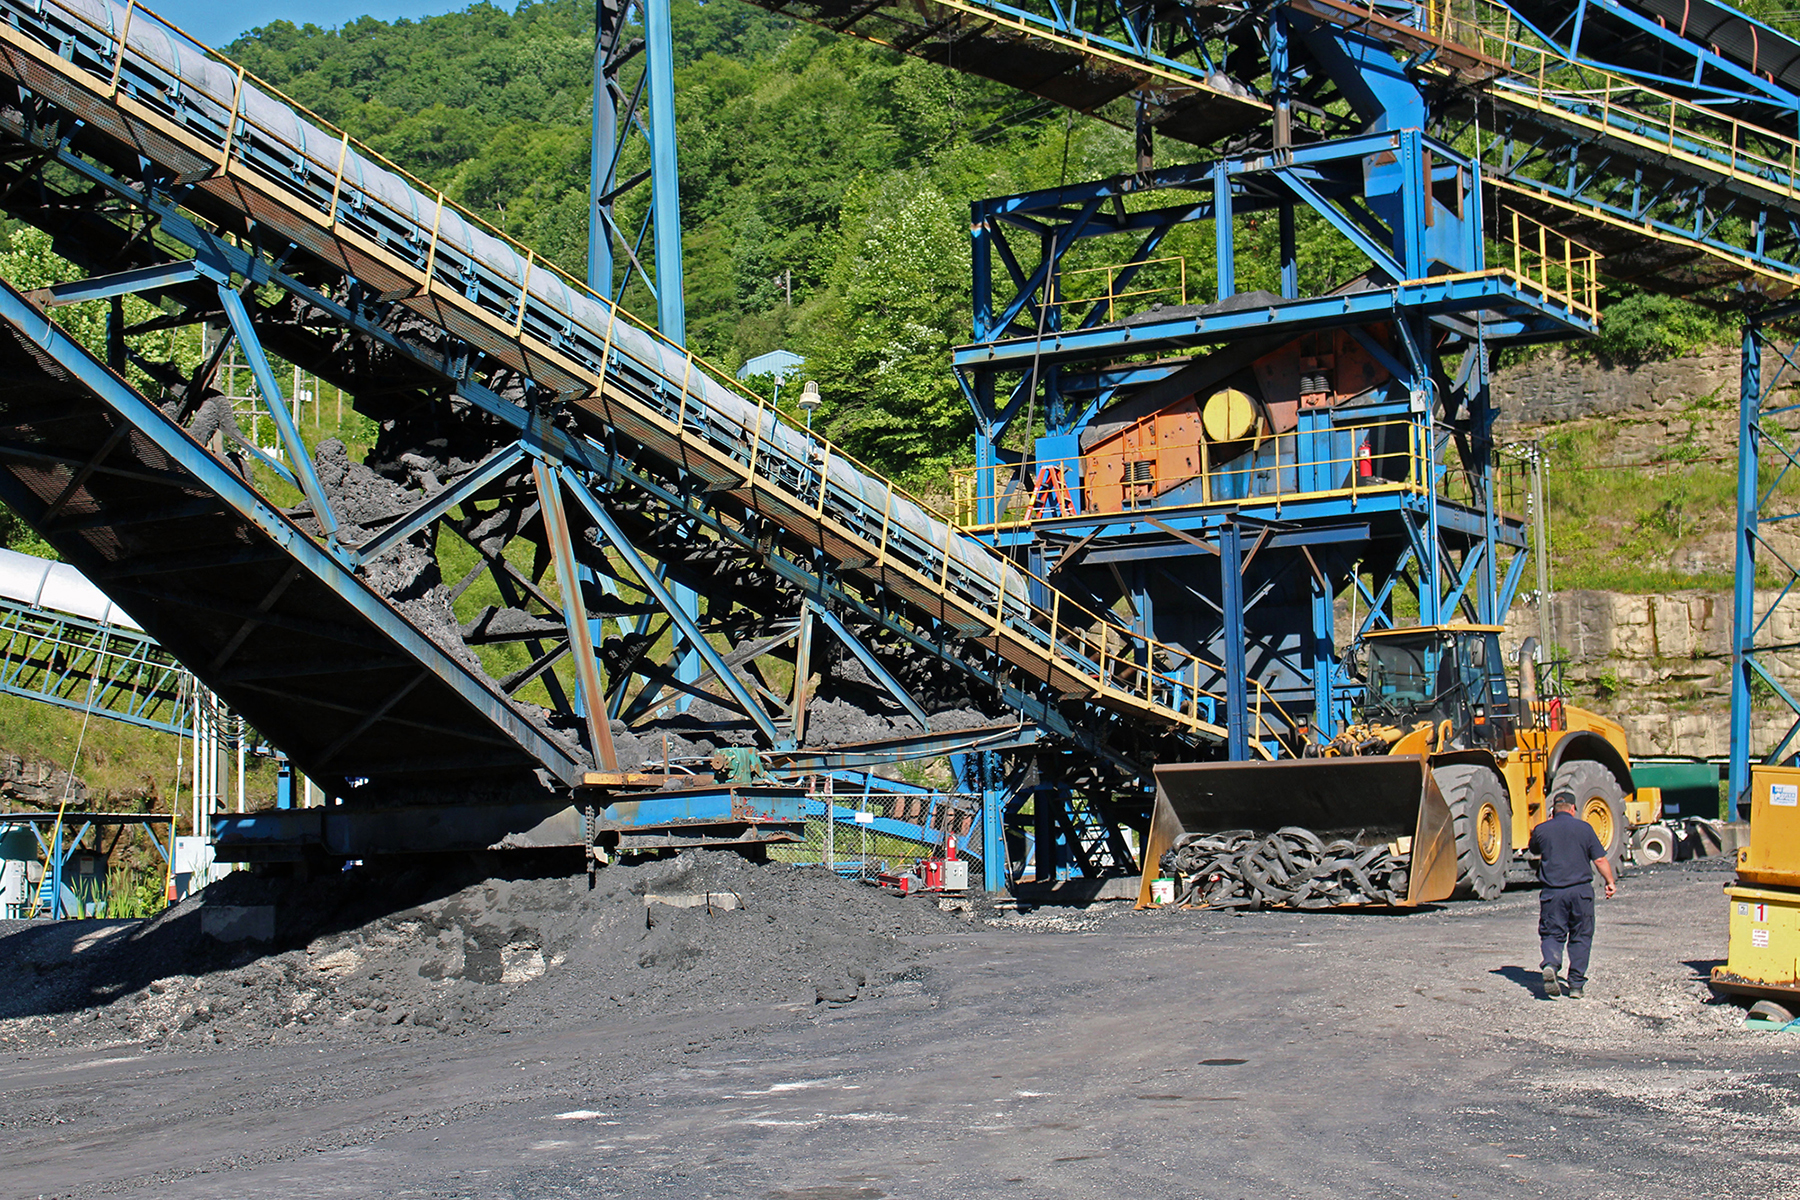 A security guard walks past coal mining equipment at Enterprise Mining Co. in Redfox, Kentucky. The mine went idle in July because of a lack of sales. (Emily Mills/News21)